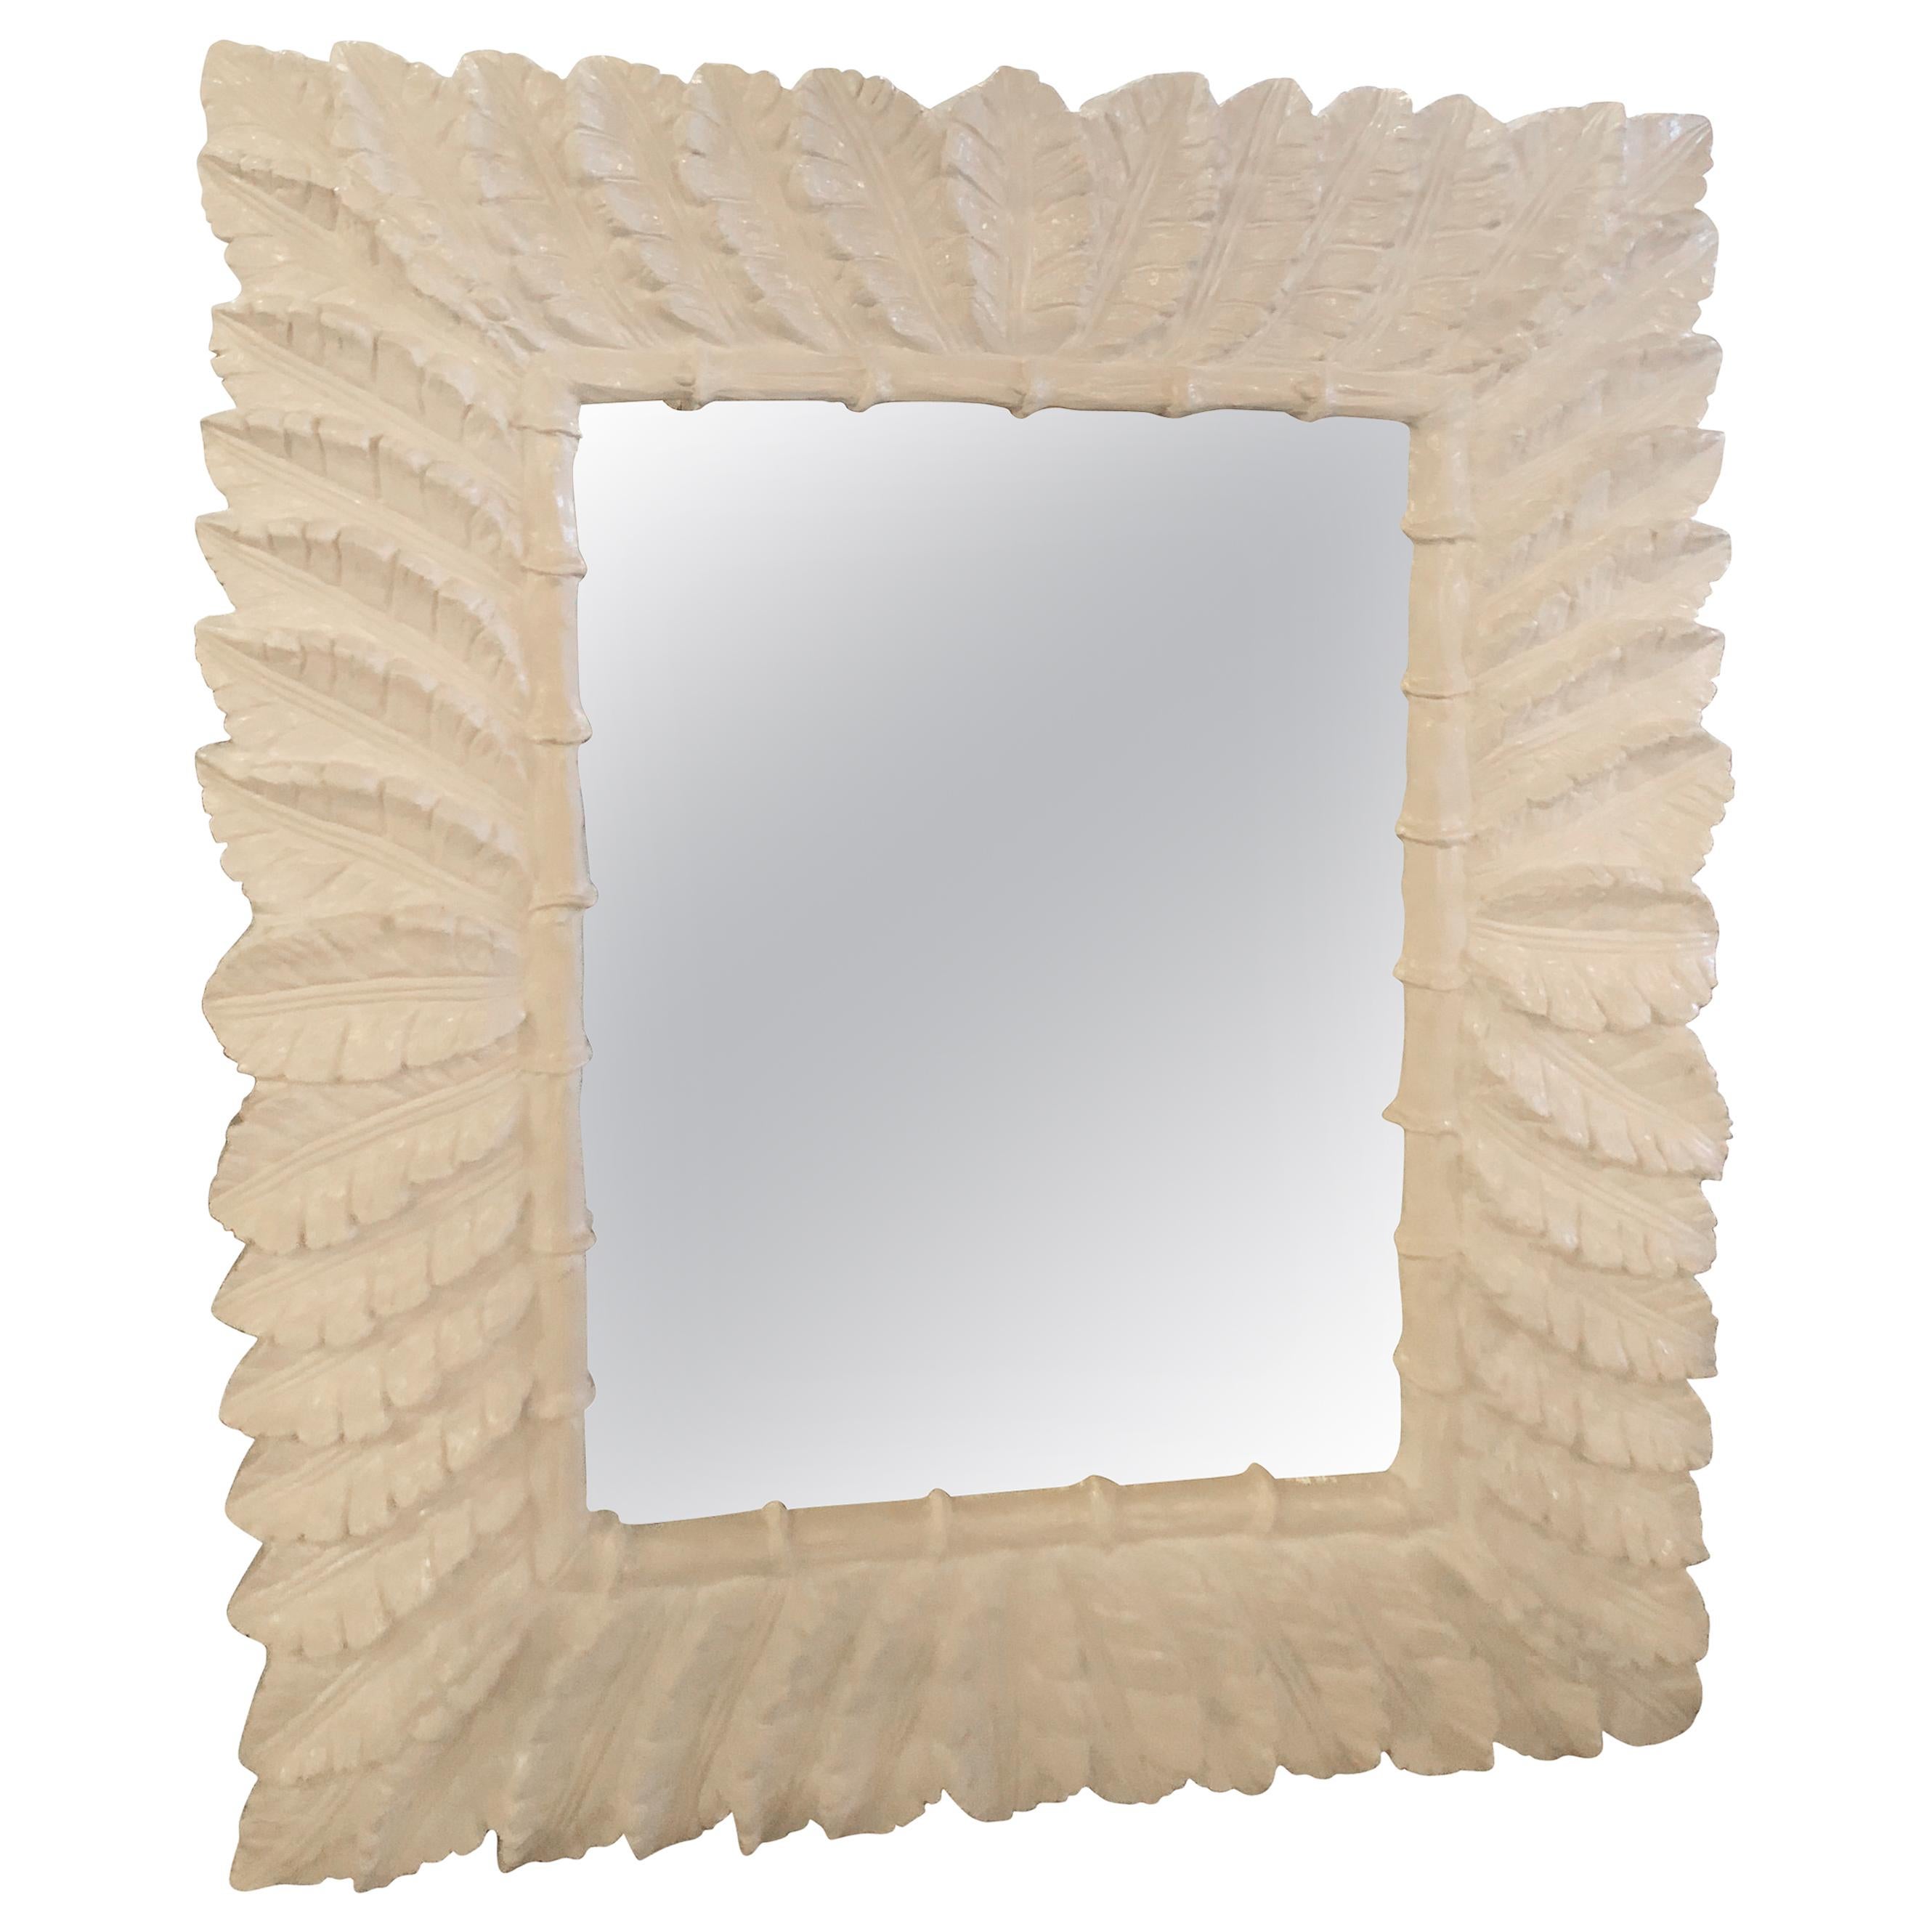 White Lacquered Tropical Palm Tree Leaf, White Lacquer Mirror Decor